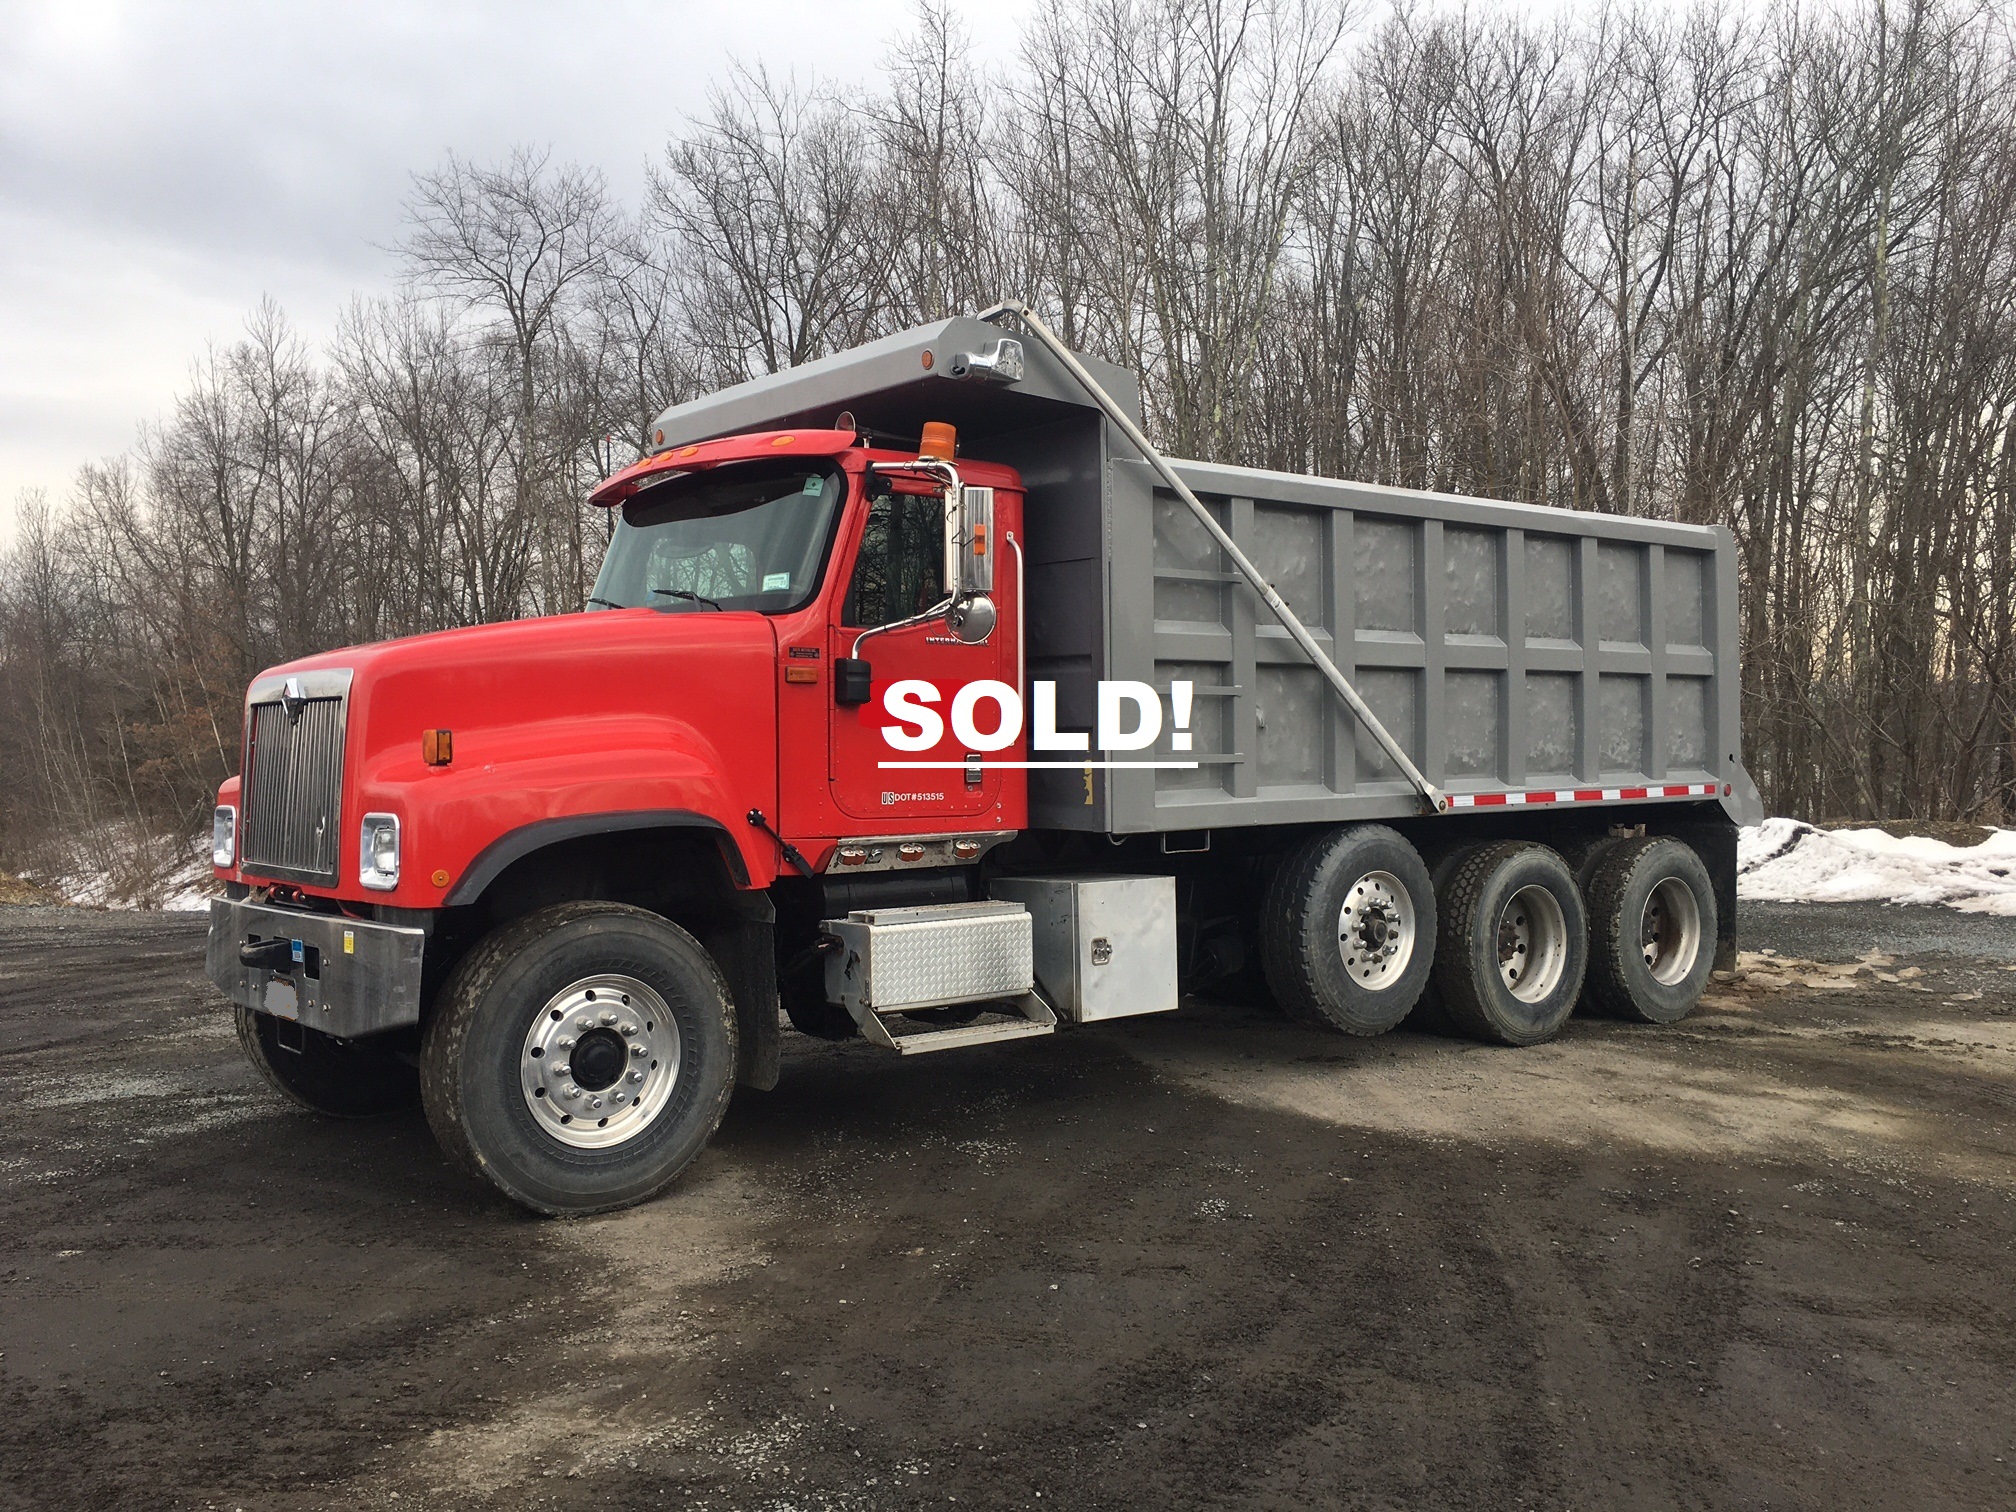 International Tri Axle Dump Truck. 2006 Paystar with 235368 miles. ISX Cummins 500 horsepower diesel engine with a three stage engine brake. 18 speed Eaton Fuller transmission with double locking rears. 20k lb. fronts, 20k lb. Steerable lift axle and 46k lb. rears with a 242 inch wheelbase and a empty weight of 29'000 lbs. 17.5 foot long by 5 foot high steel dump box sandblasted and repainted outside. Interior Eagle package design with power windows, power locks, cruise control, heated mirrors, heat/AC, AM/FM CD player and air ride drivers seat.